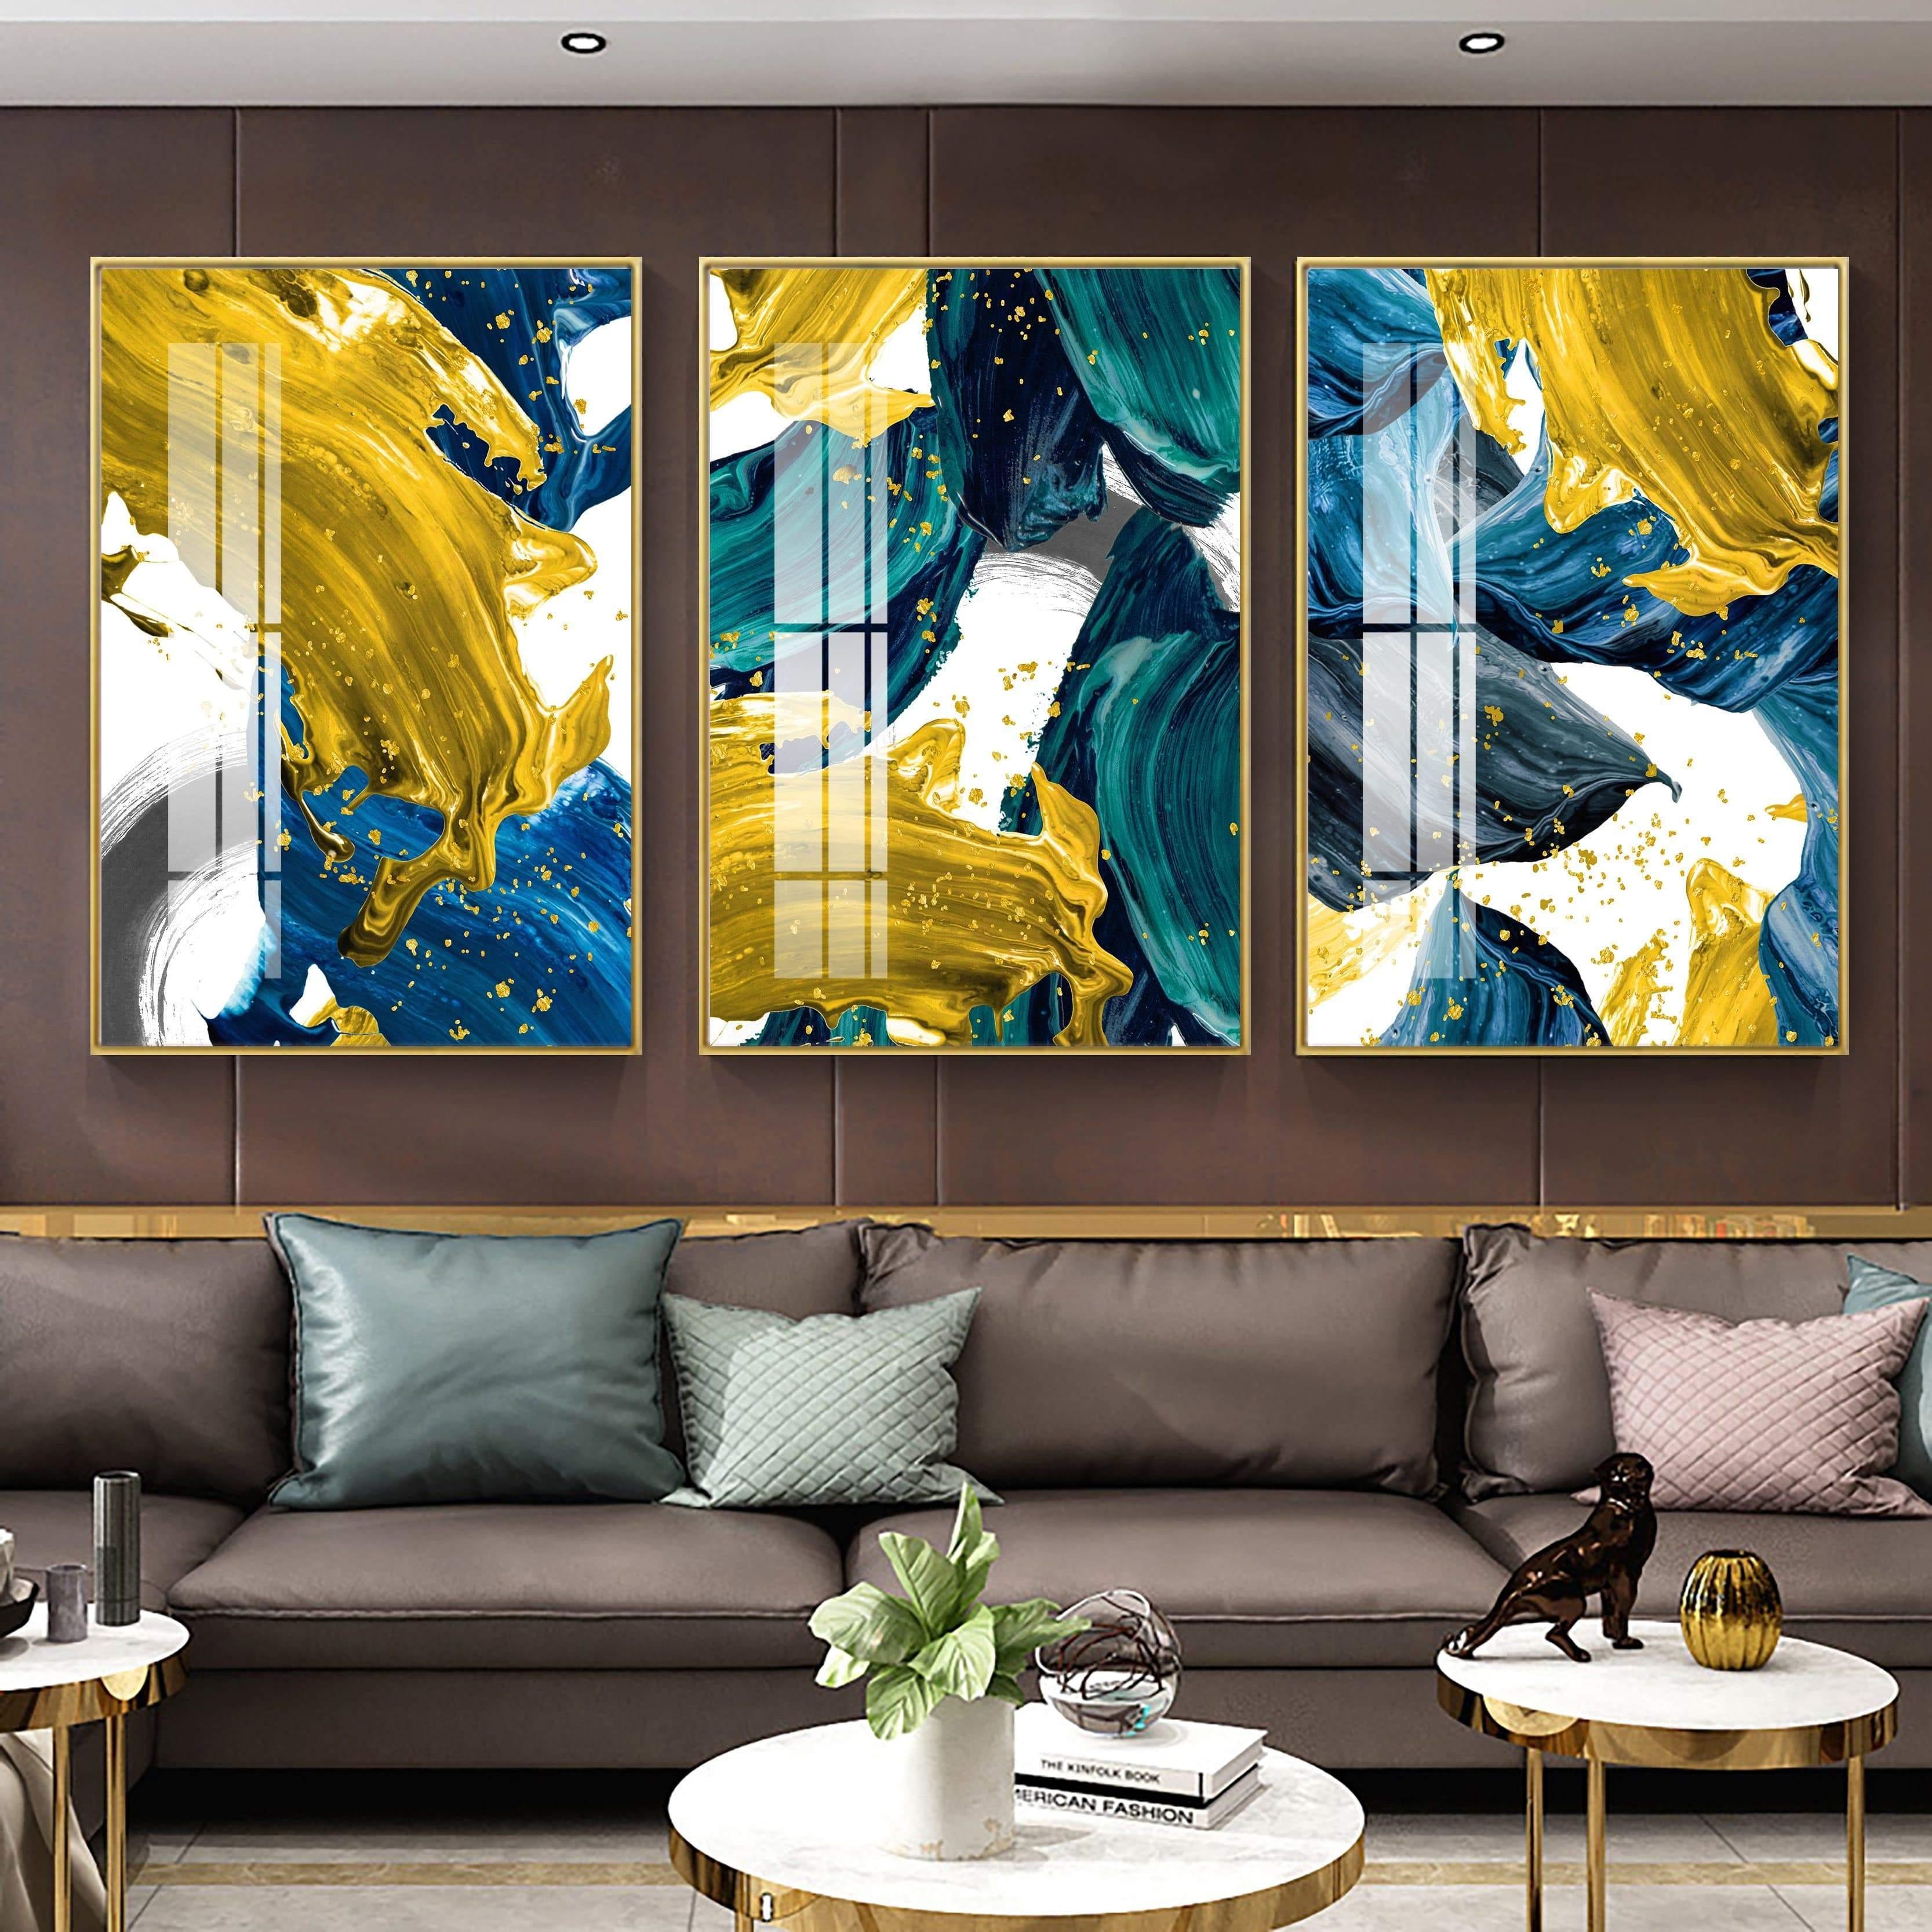 Shop 0 Abstract Wall Poster Yellow Golden Foil Blue Nordic Canvas Print Colorful Block Art Painting Pictures Living Room Hotel Decor Mademoiselle Home Decor